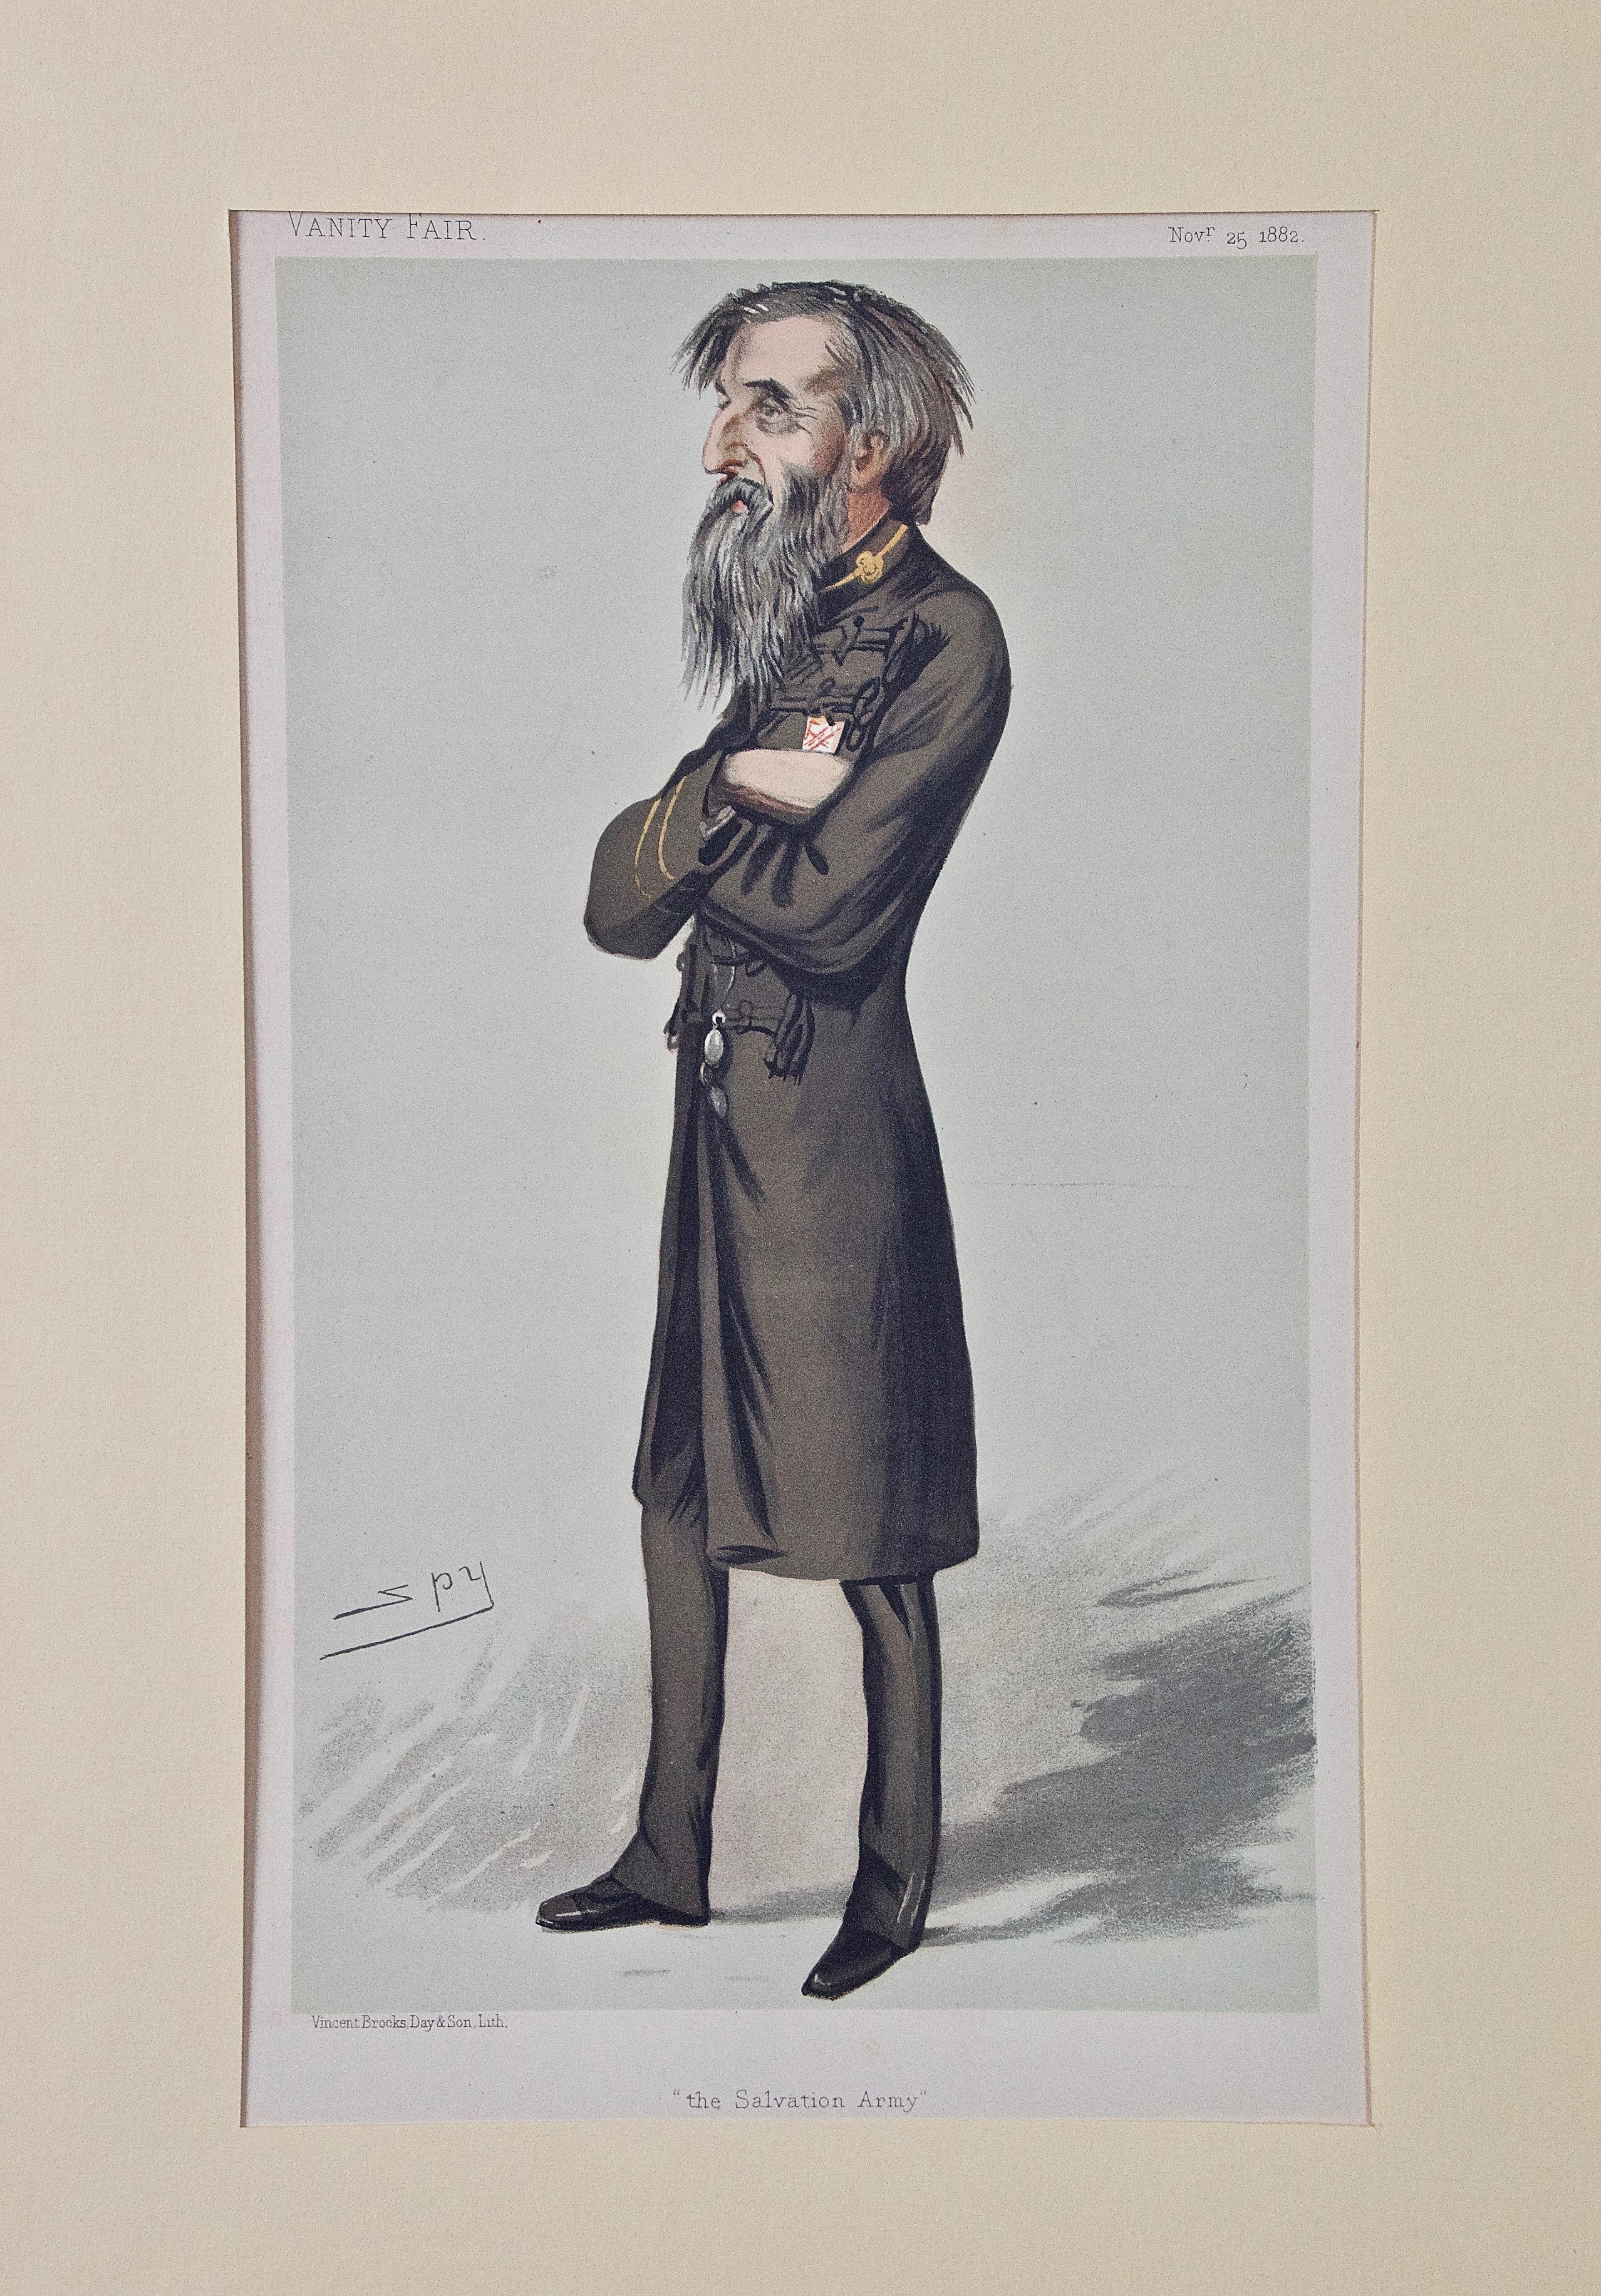 Sir Leslie Ward Portrait Print - William Booth, Founder of "The Salvation Army": A 19th C. Vanity Fair Caricature